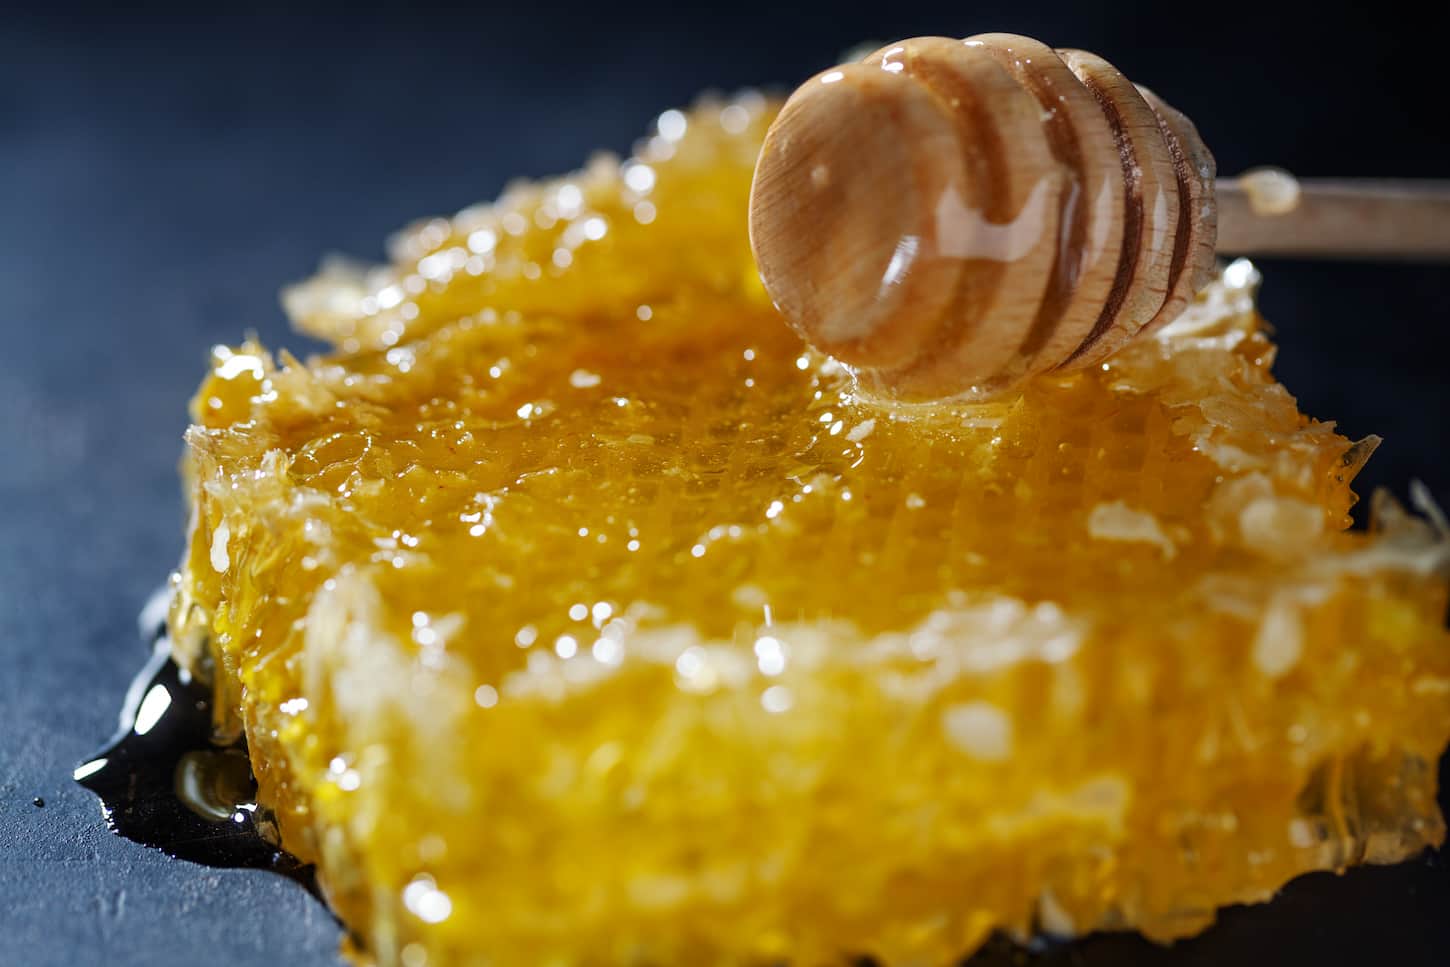 An image of a raw crystallized honeycomb and honey dipper on a dark background.